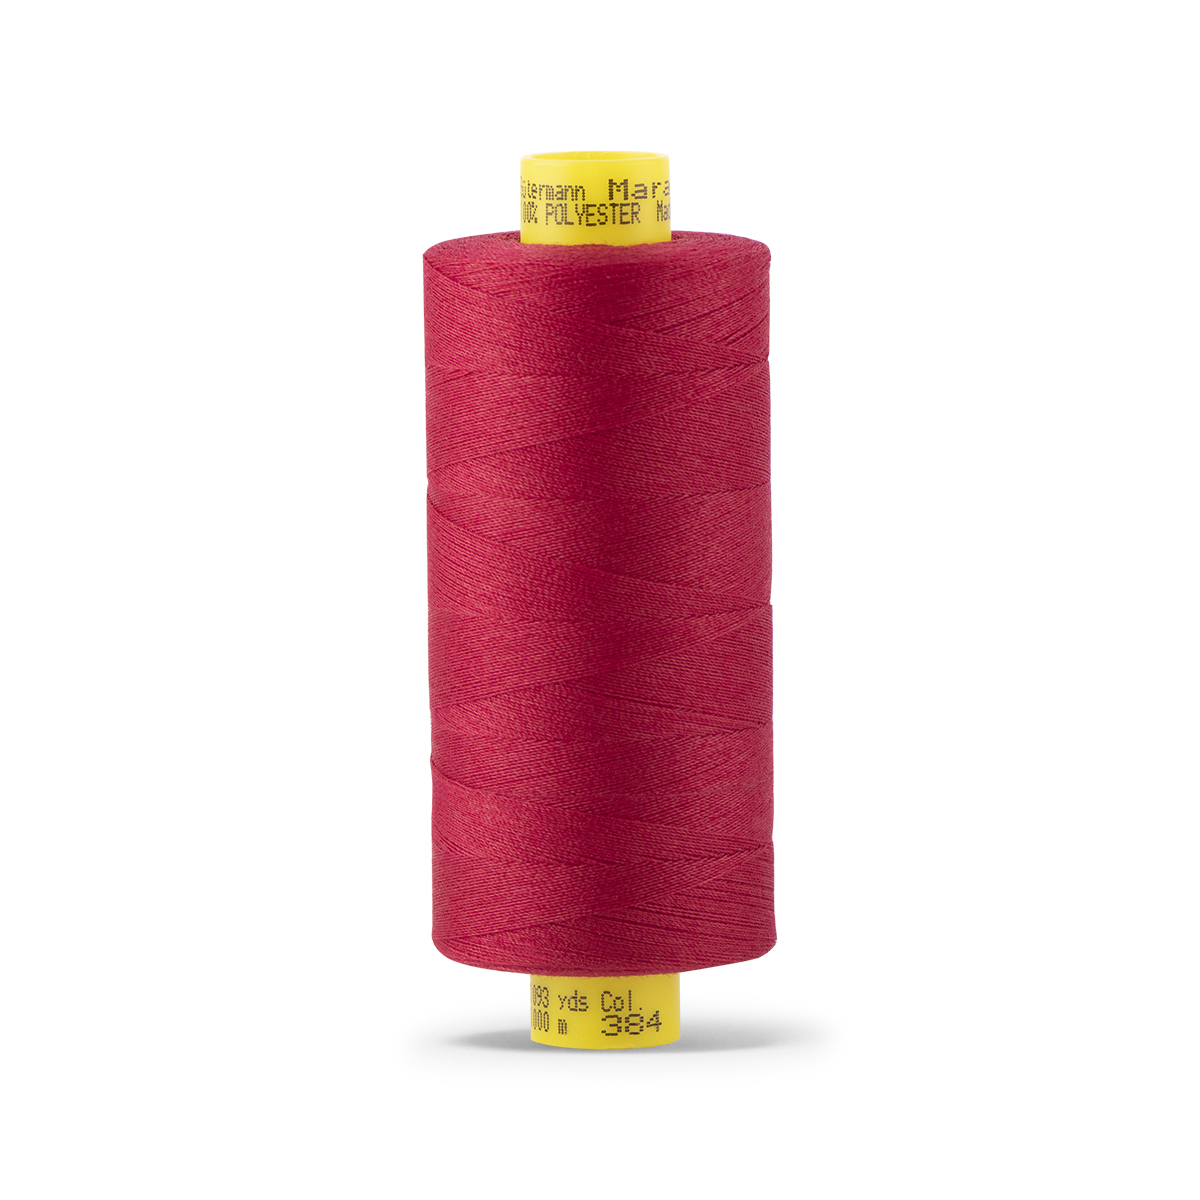 Gutermann Mara 150 Poly Wrapped Poly Core Thread - Tex 20 - 1,093 yds. -  #000